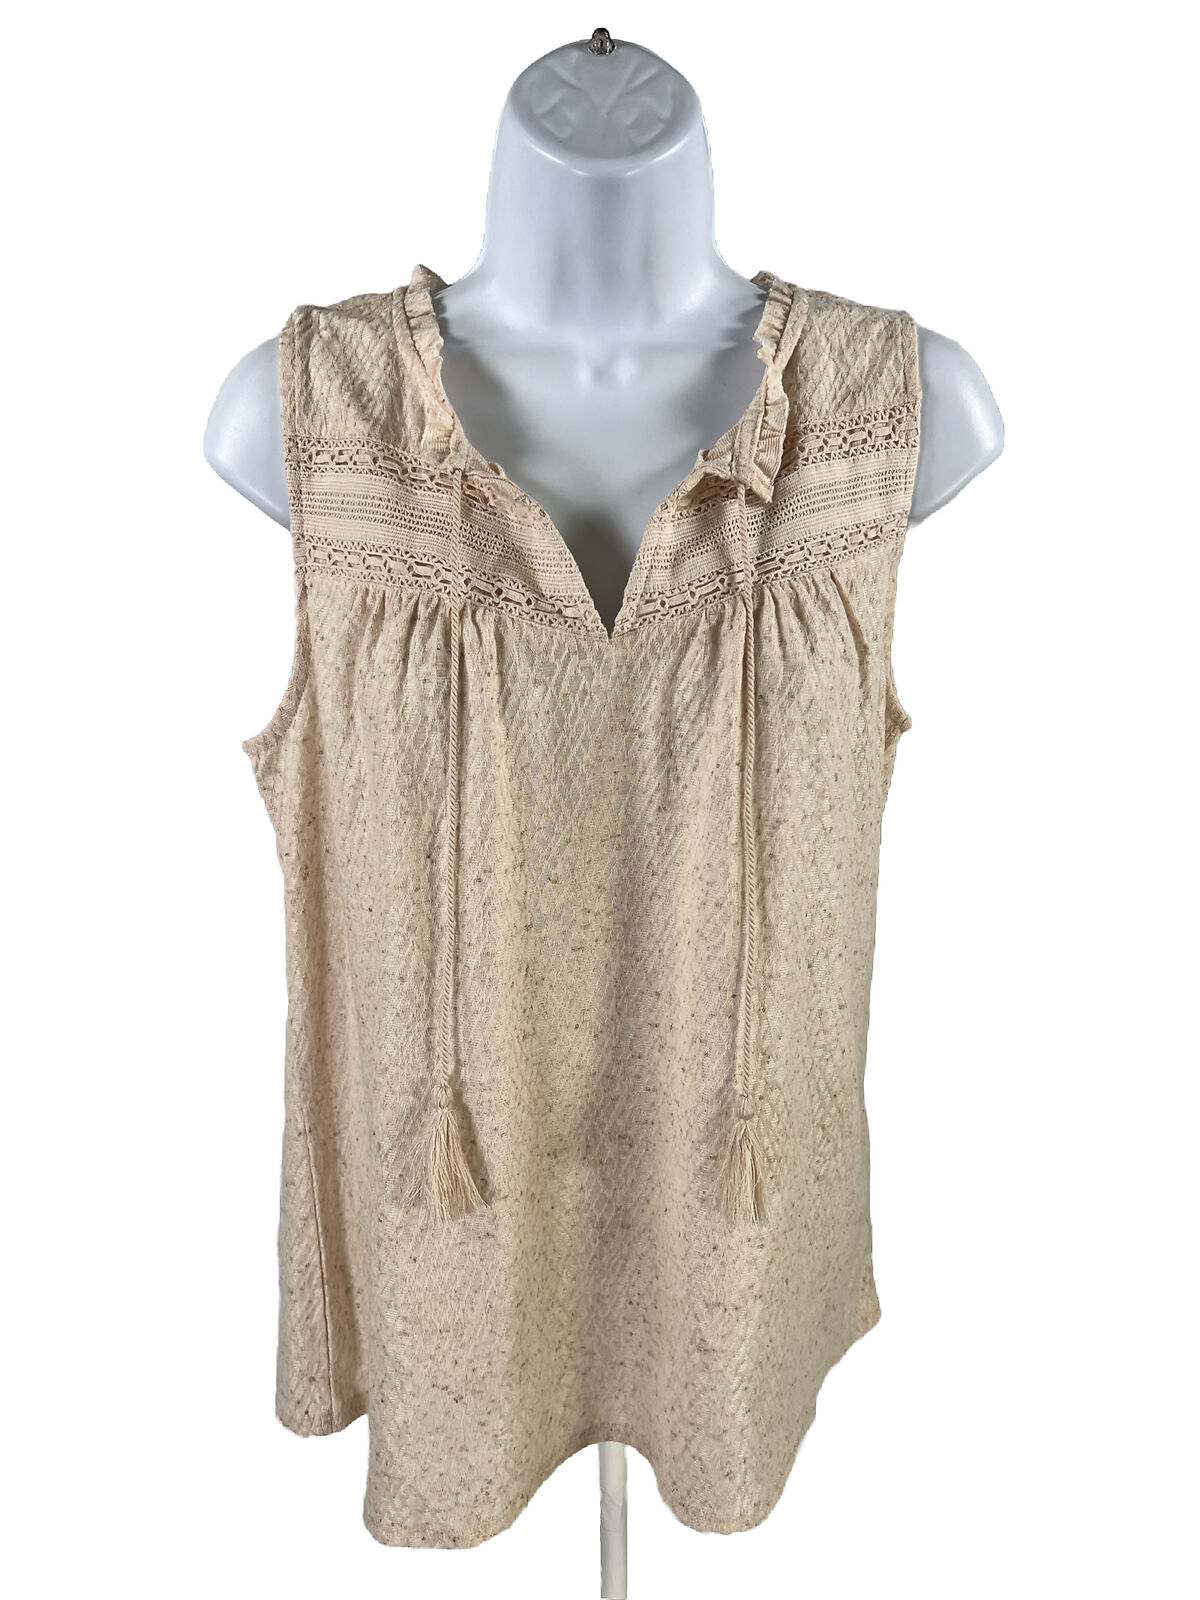 NEW Cable and Gauge Women's Beige Sleeveless Tassel Top - M